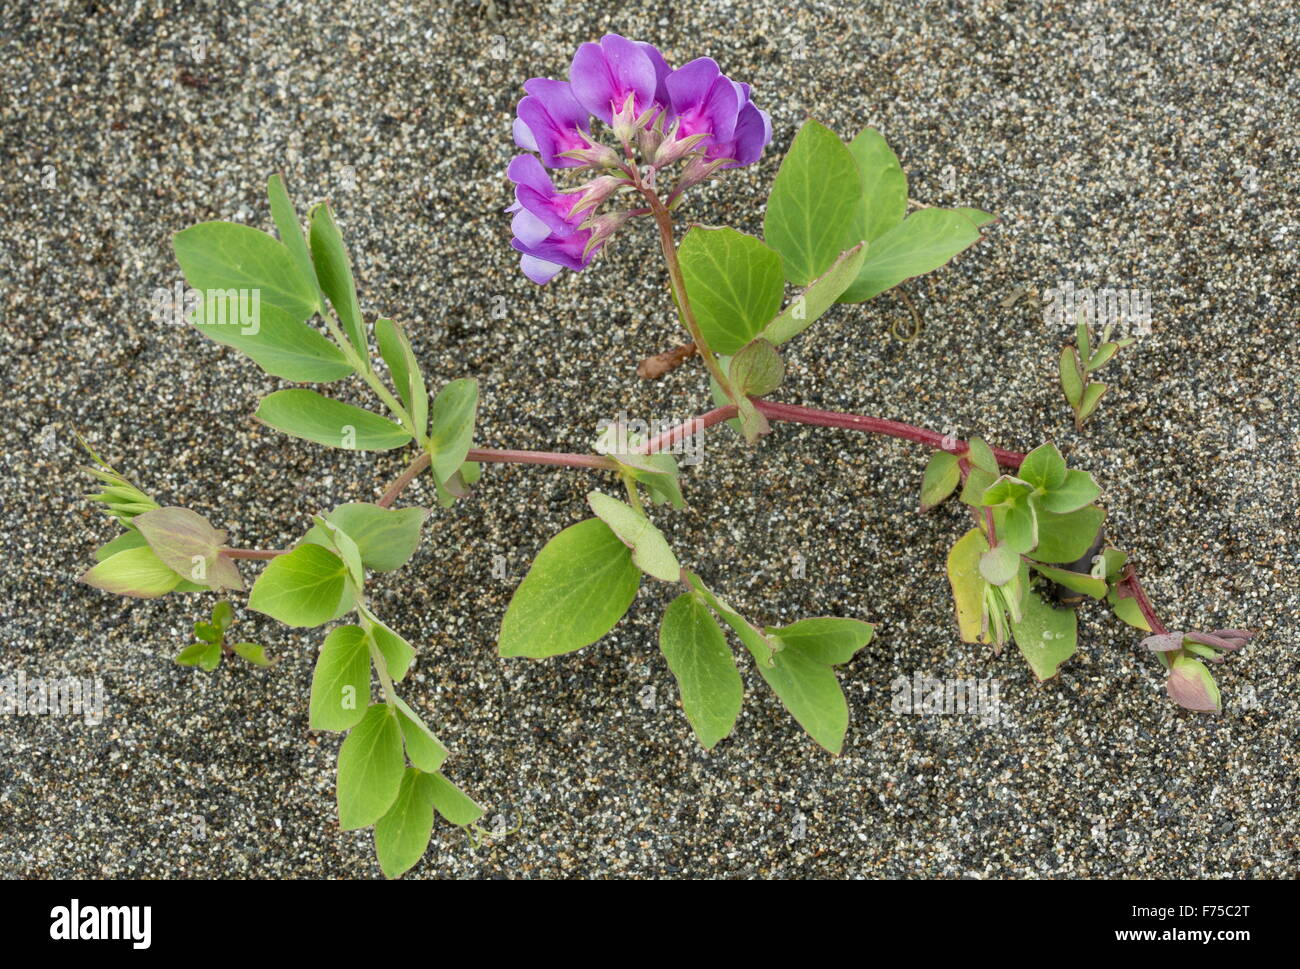 Sea pea or Beach pea, in flower on sand. A circumboreal plant with floating seeds. Stock Photo